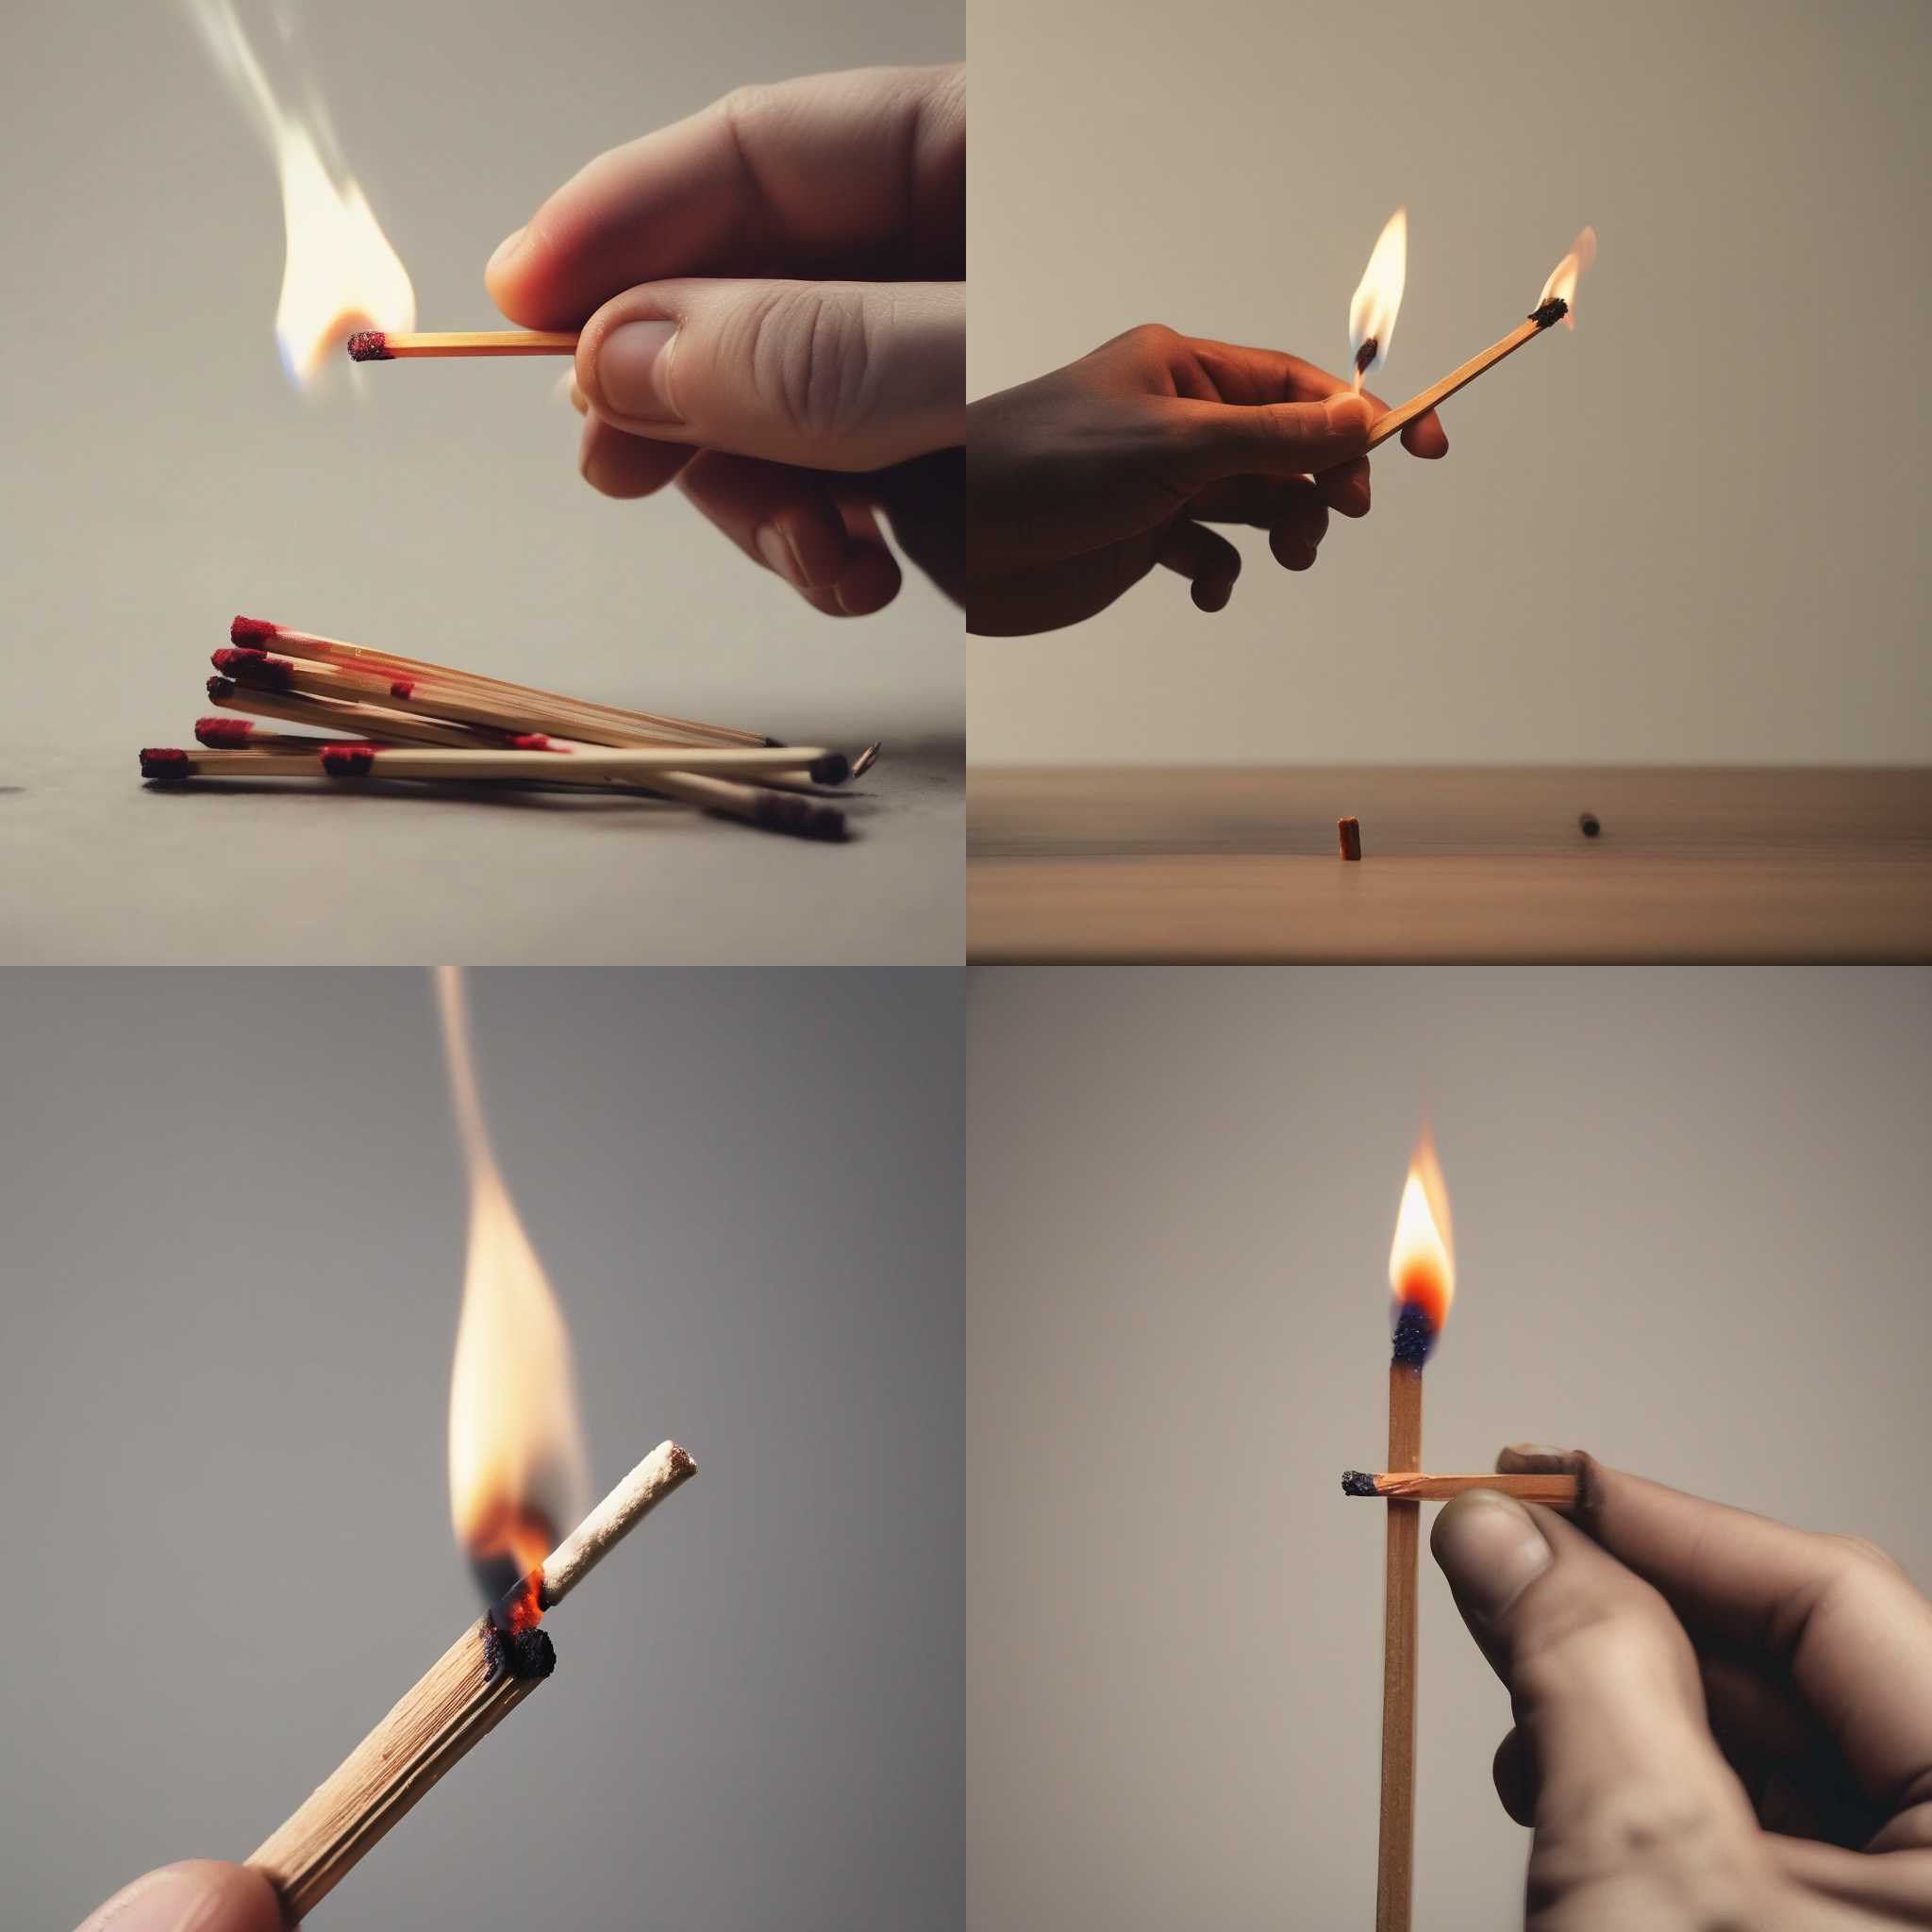 A person igniting a match